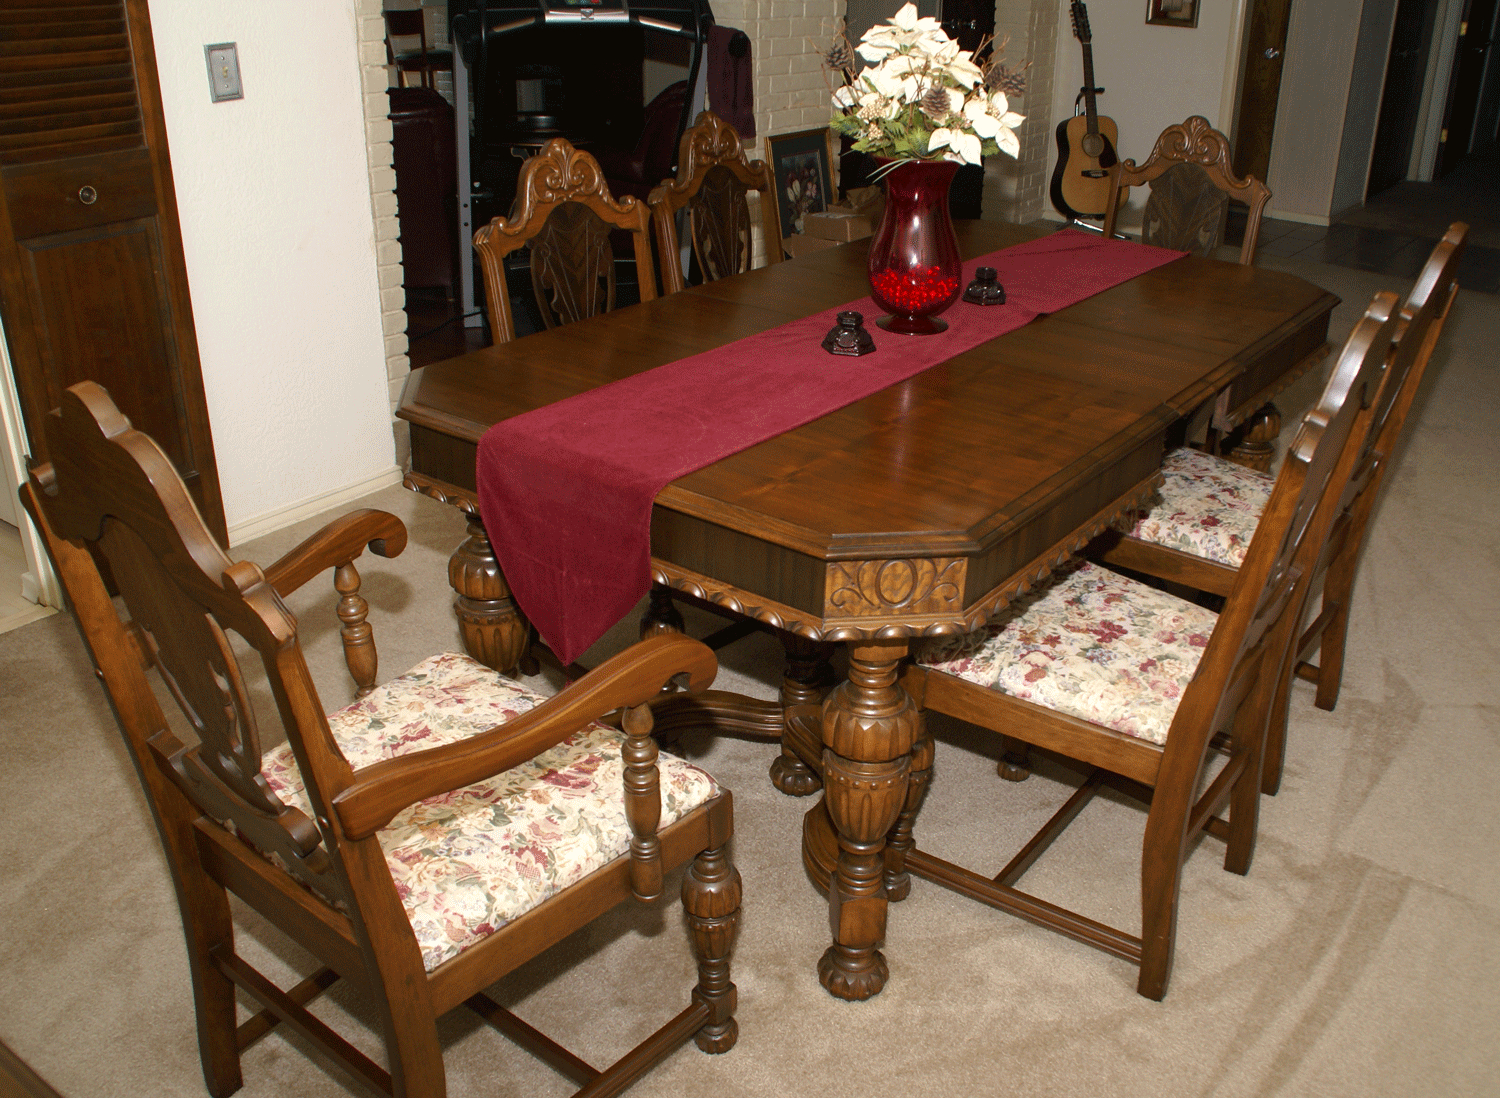 1920s dining room with benches